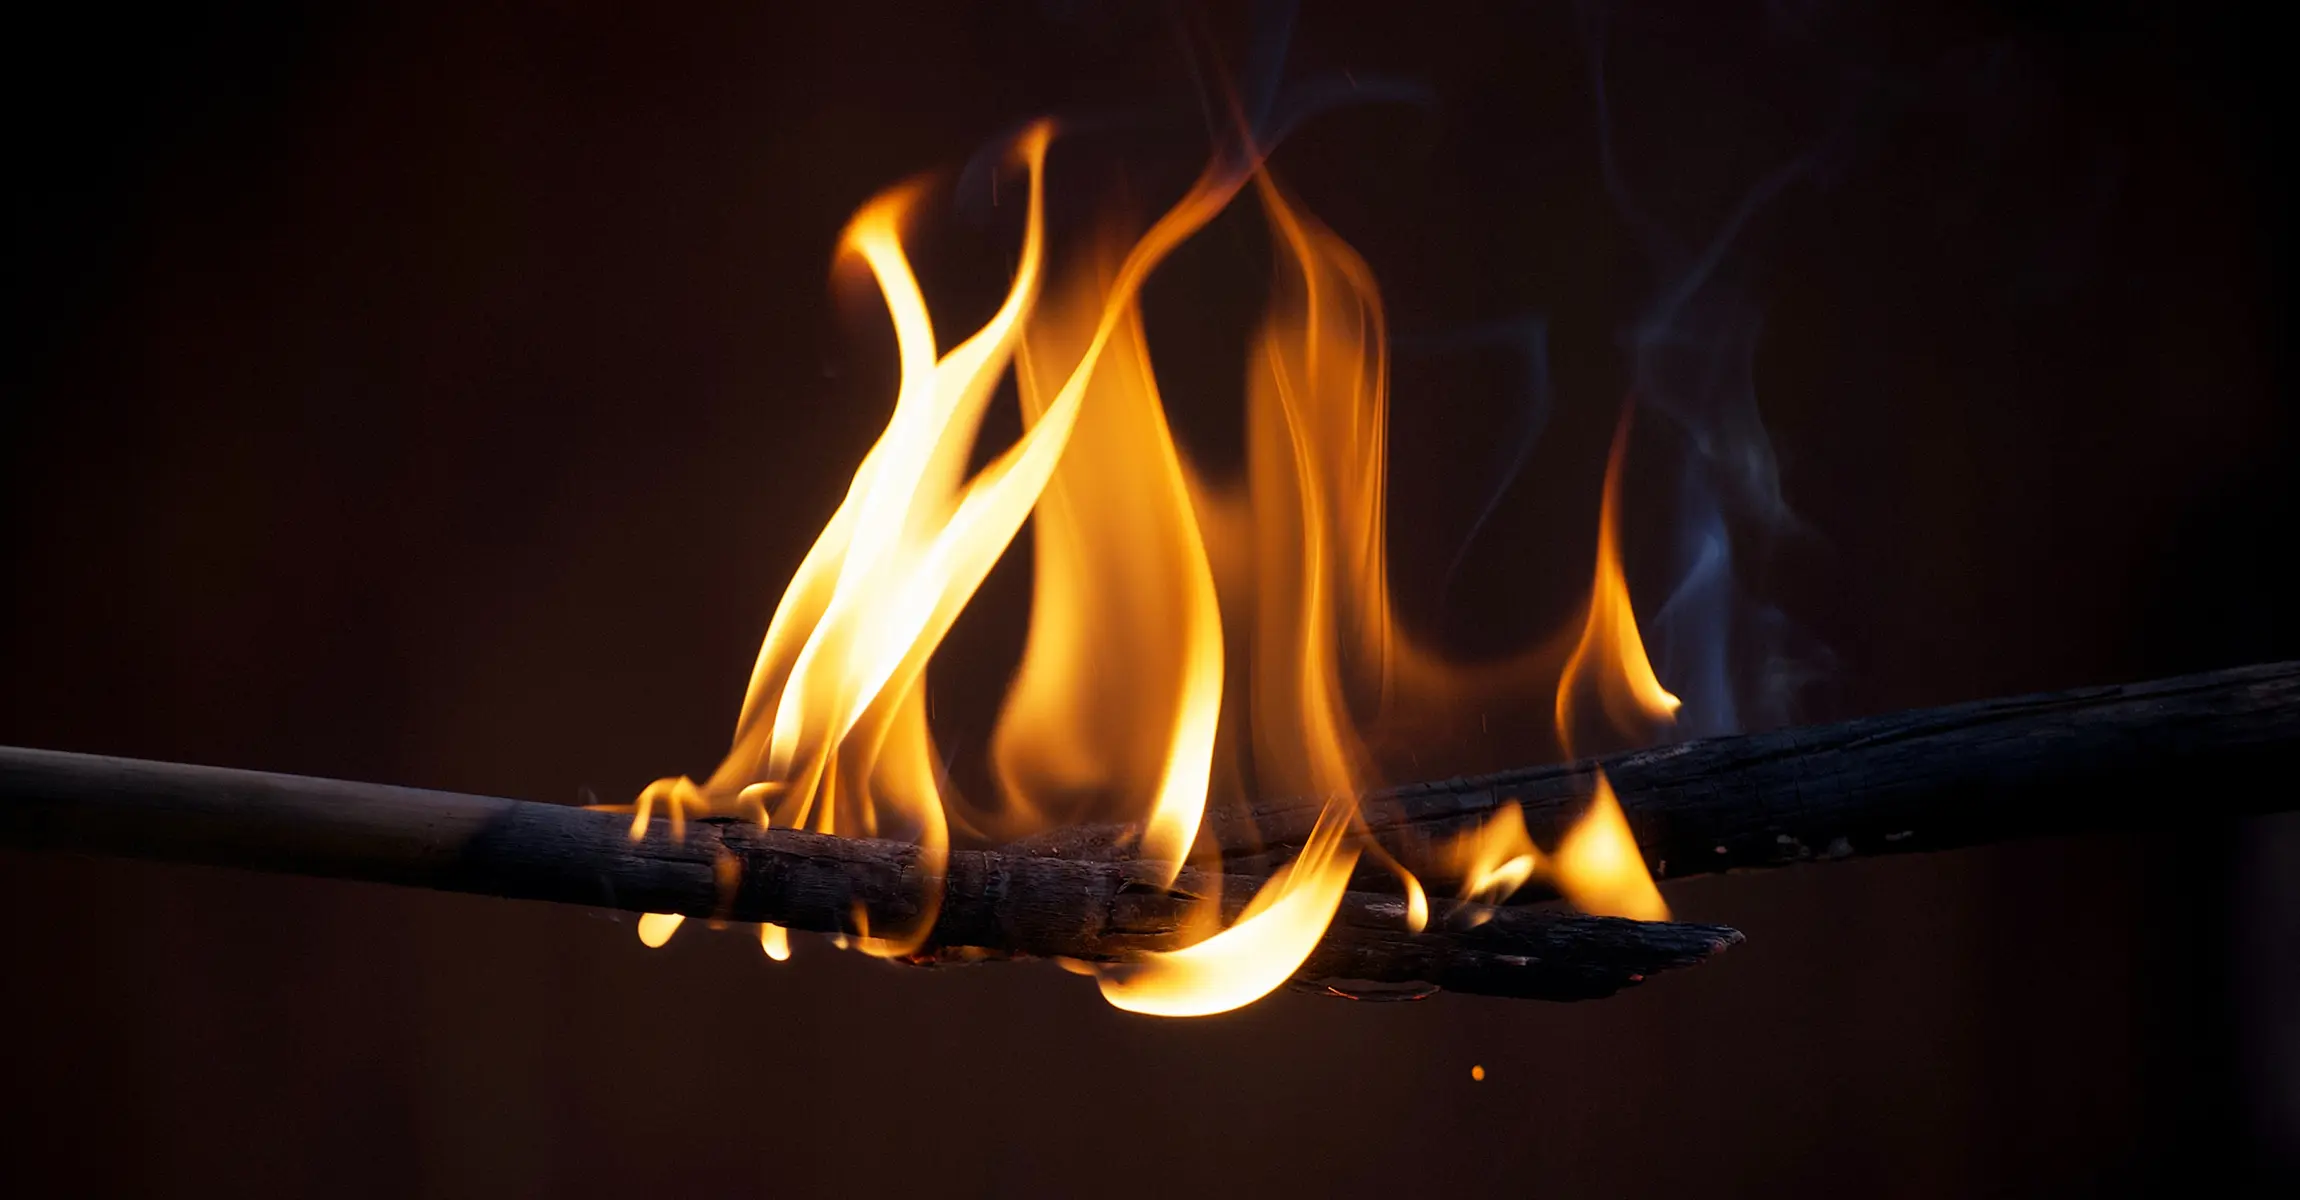 Burnout prevention: “Help, my team is burning out!”